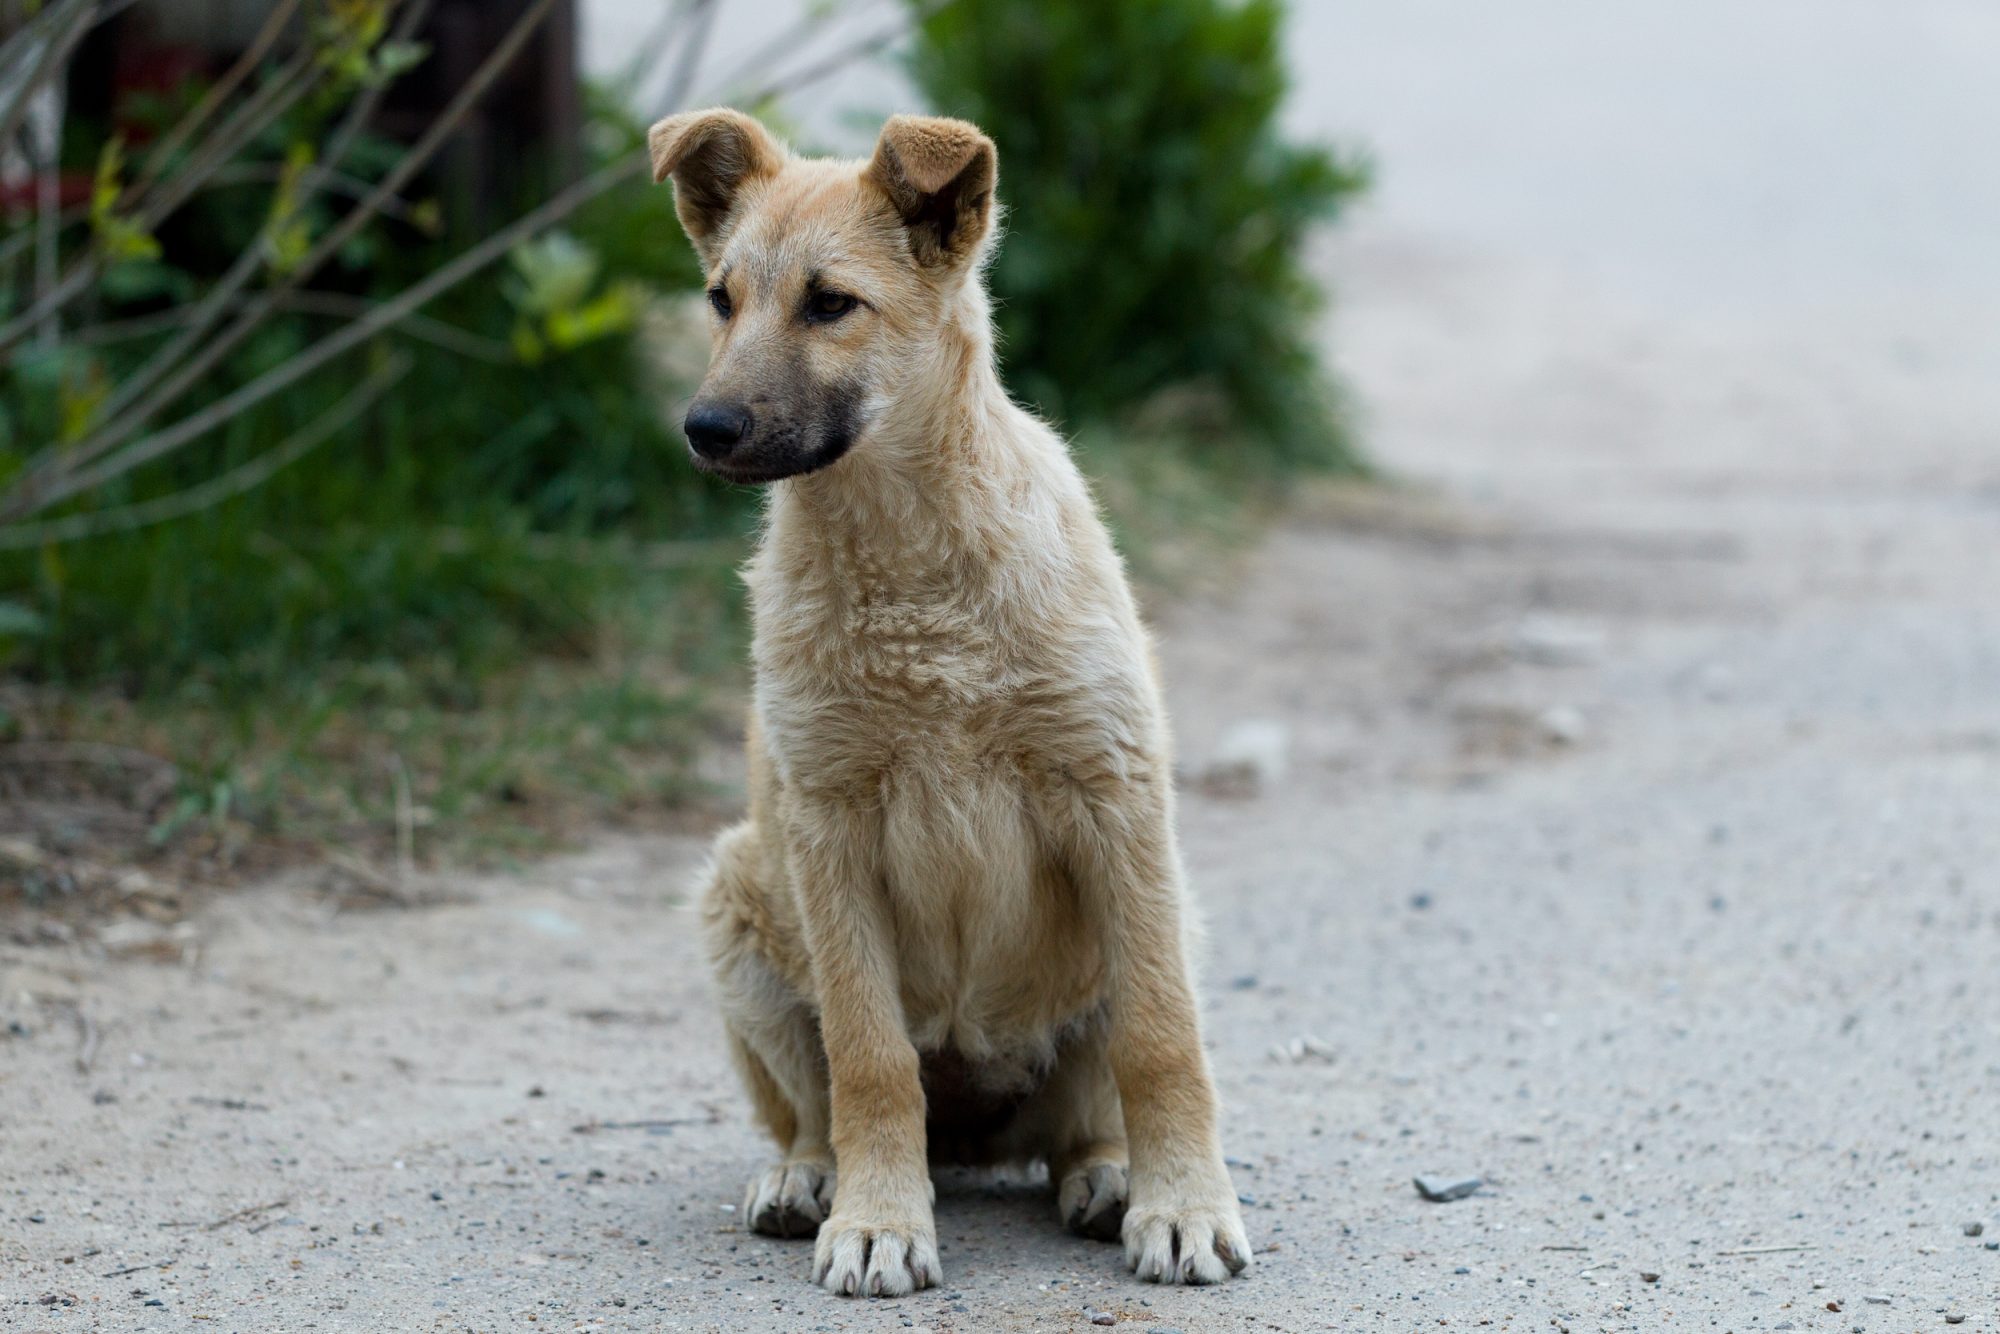 Solution for stray dogs on Qatar streets soon: Ministry